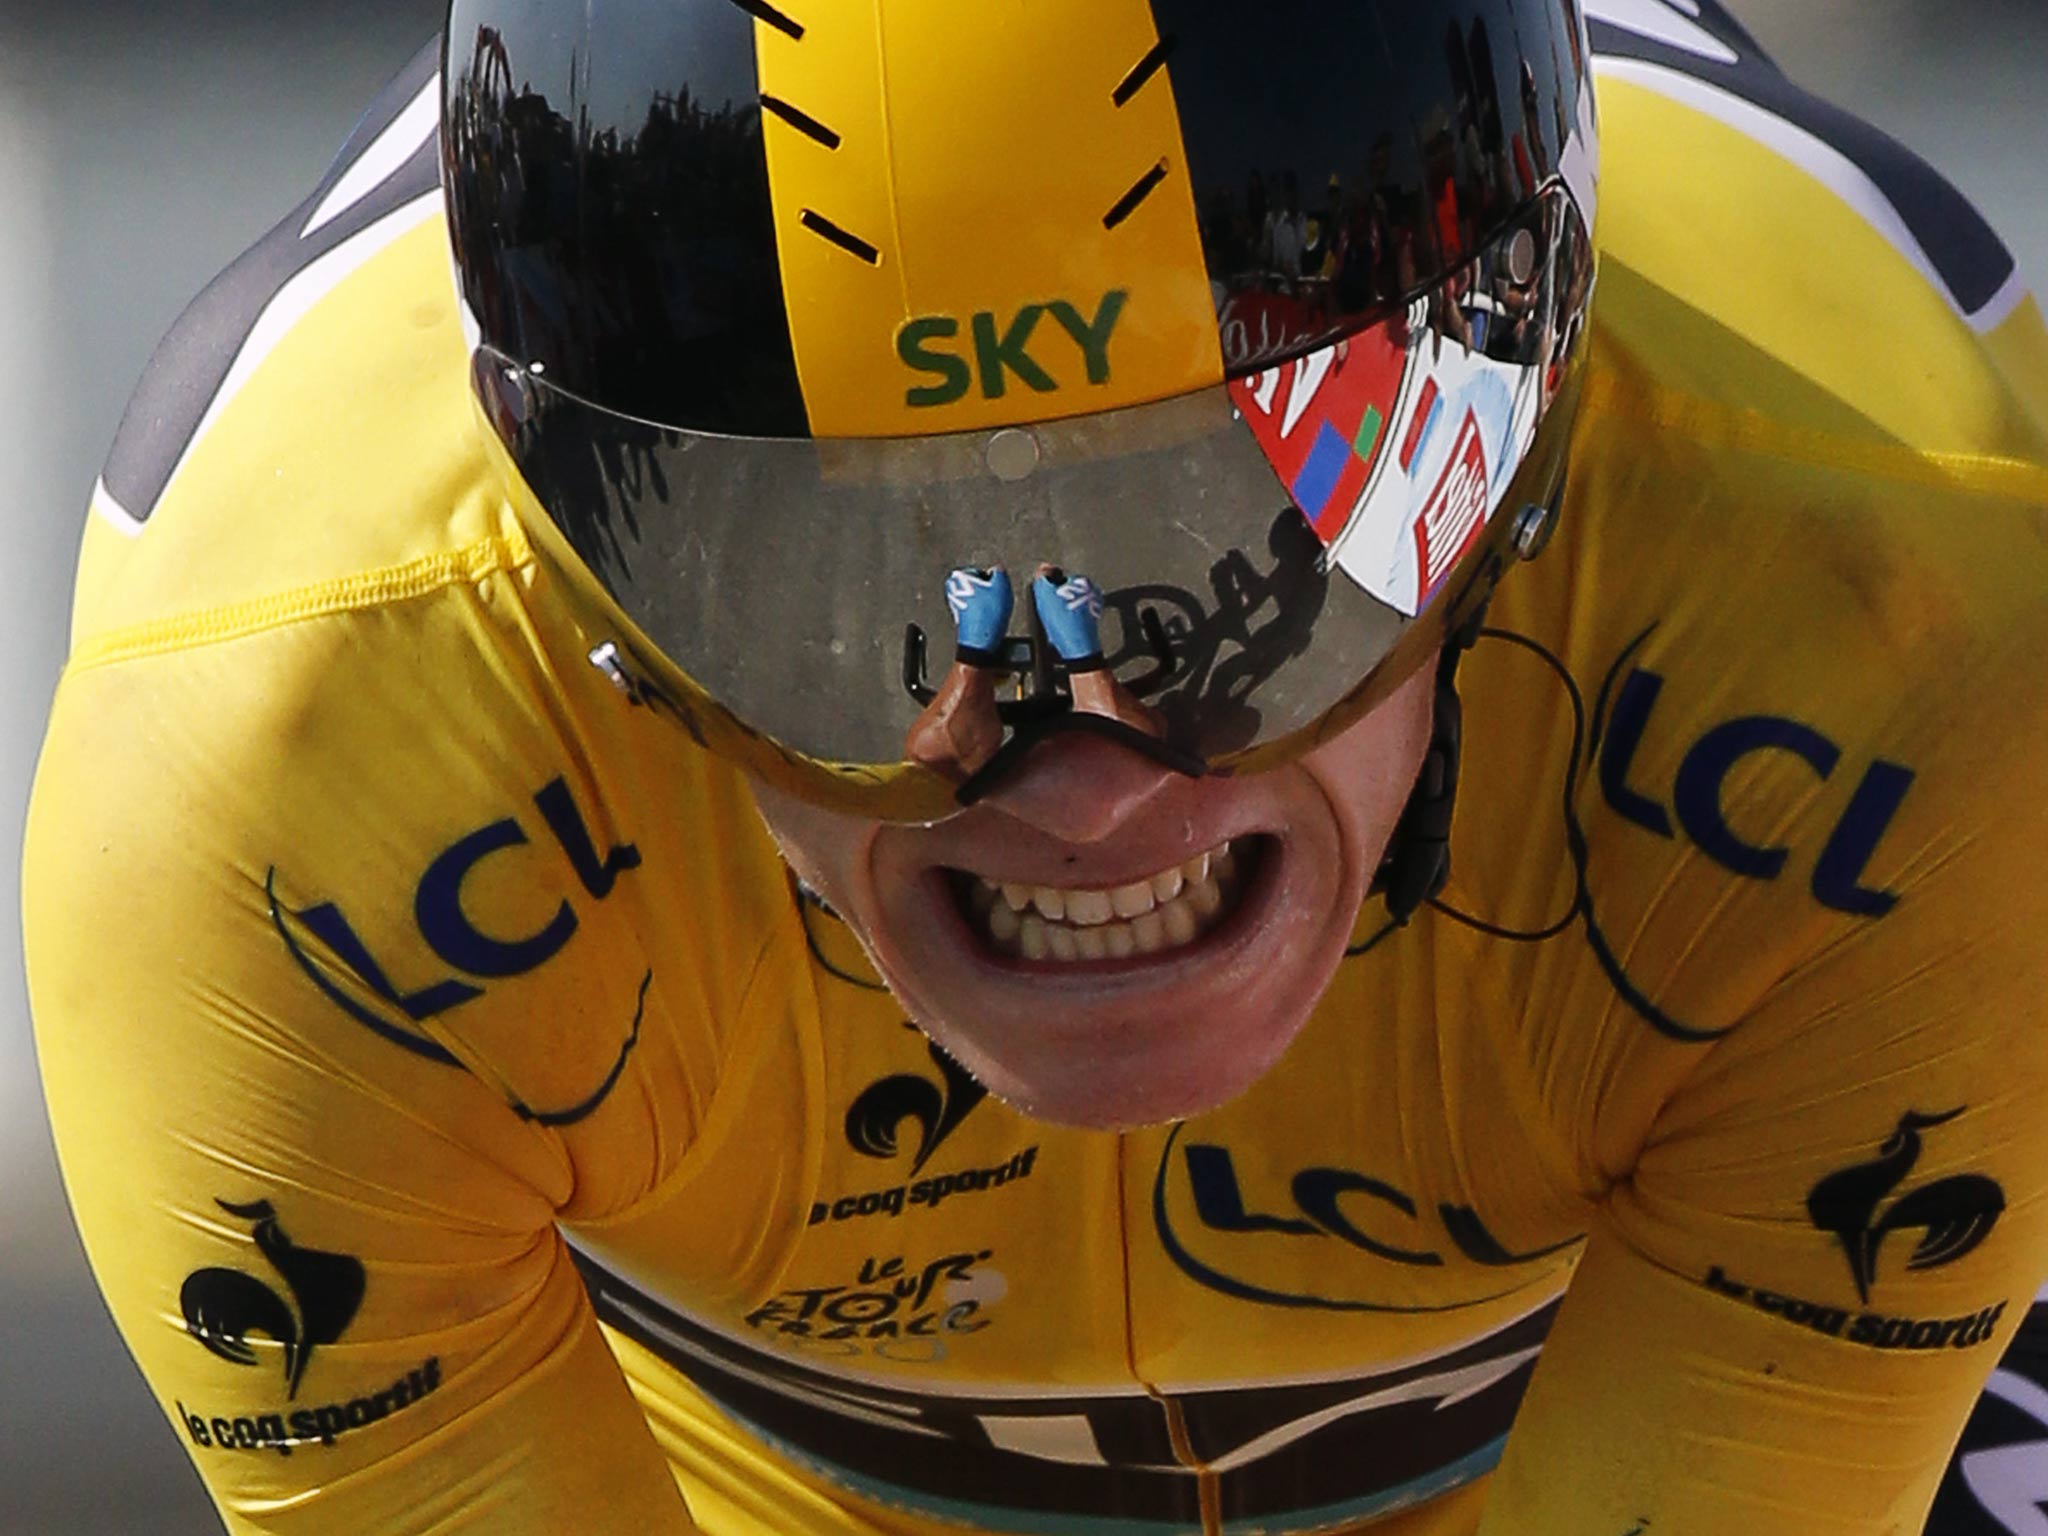 Chris Froome pictures on stage 11 of the Tour